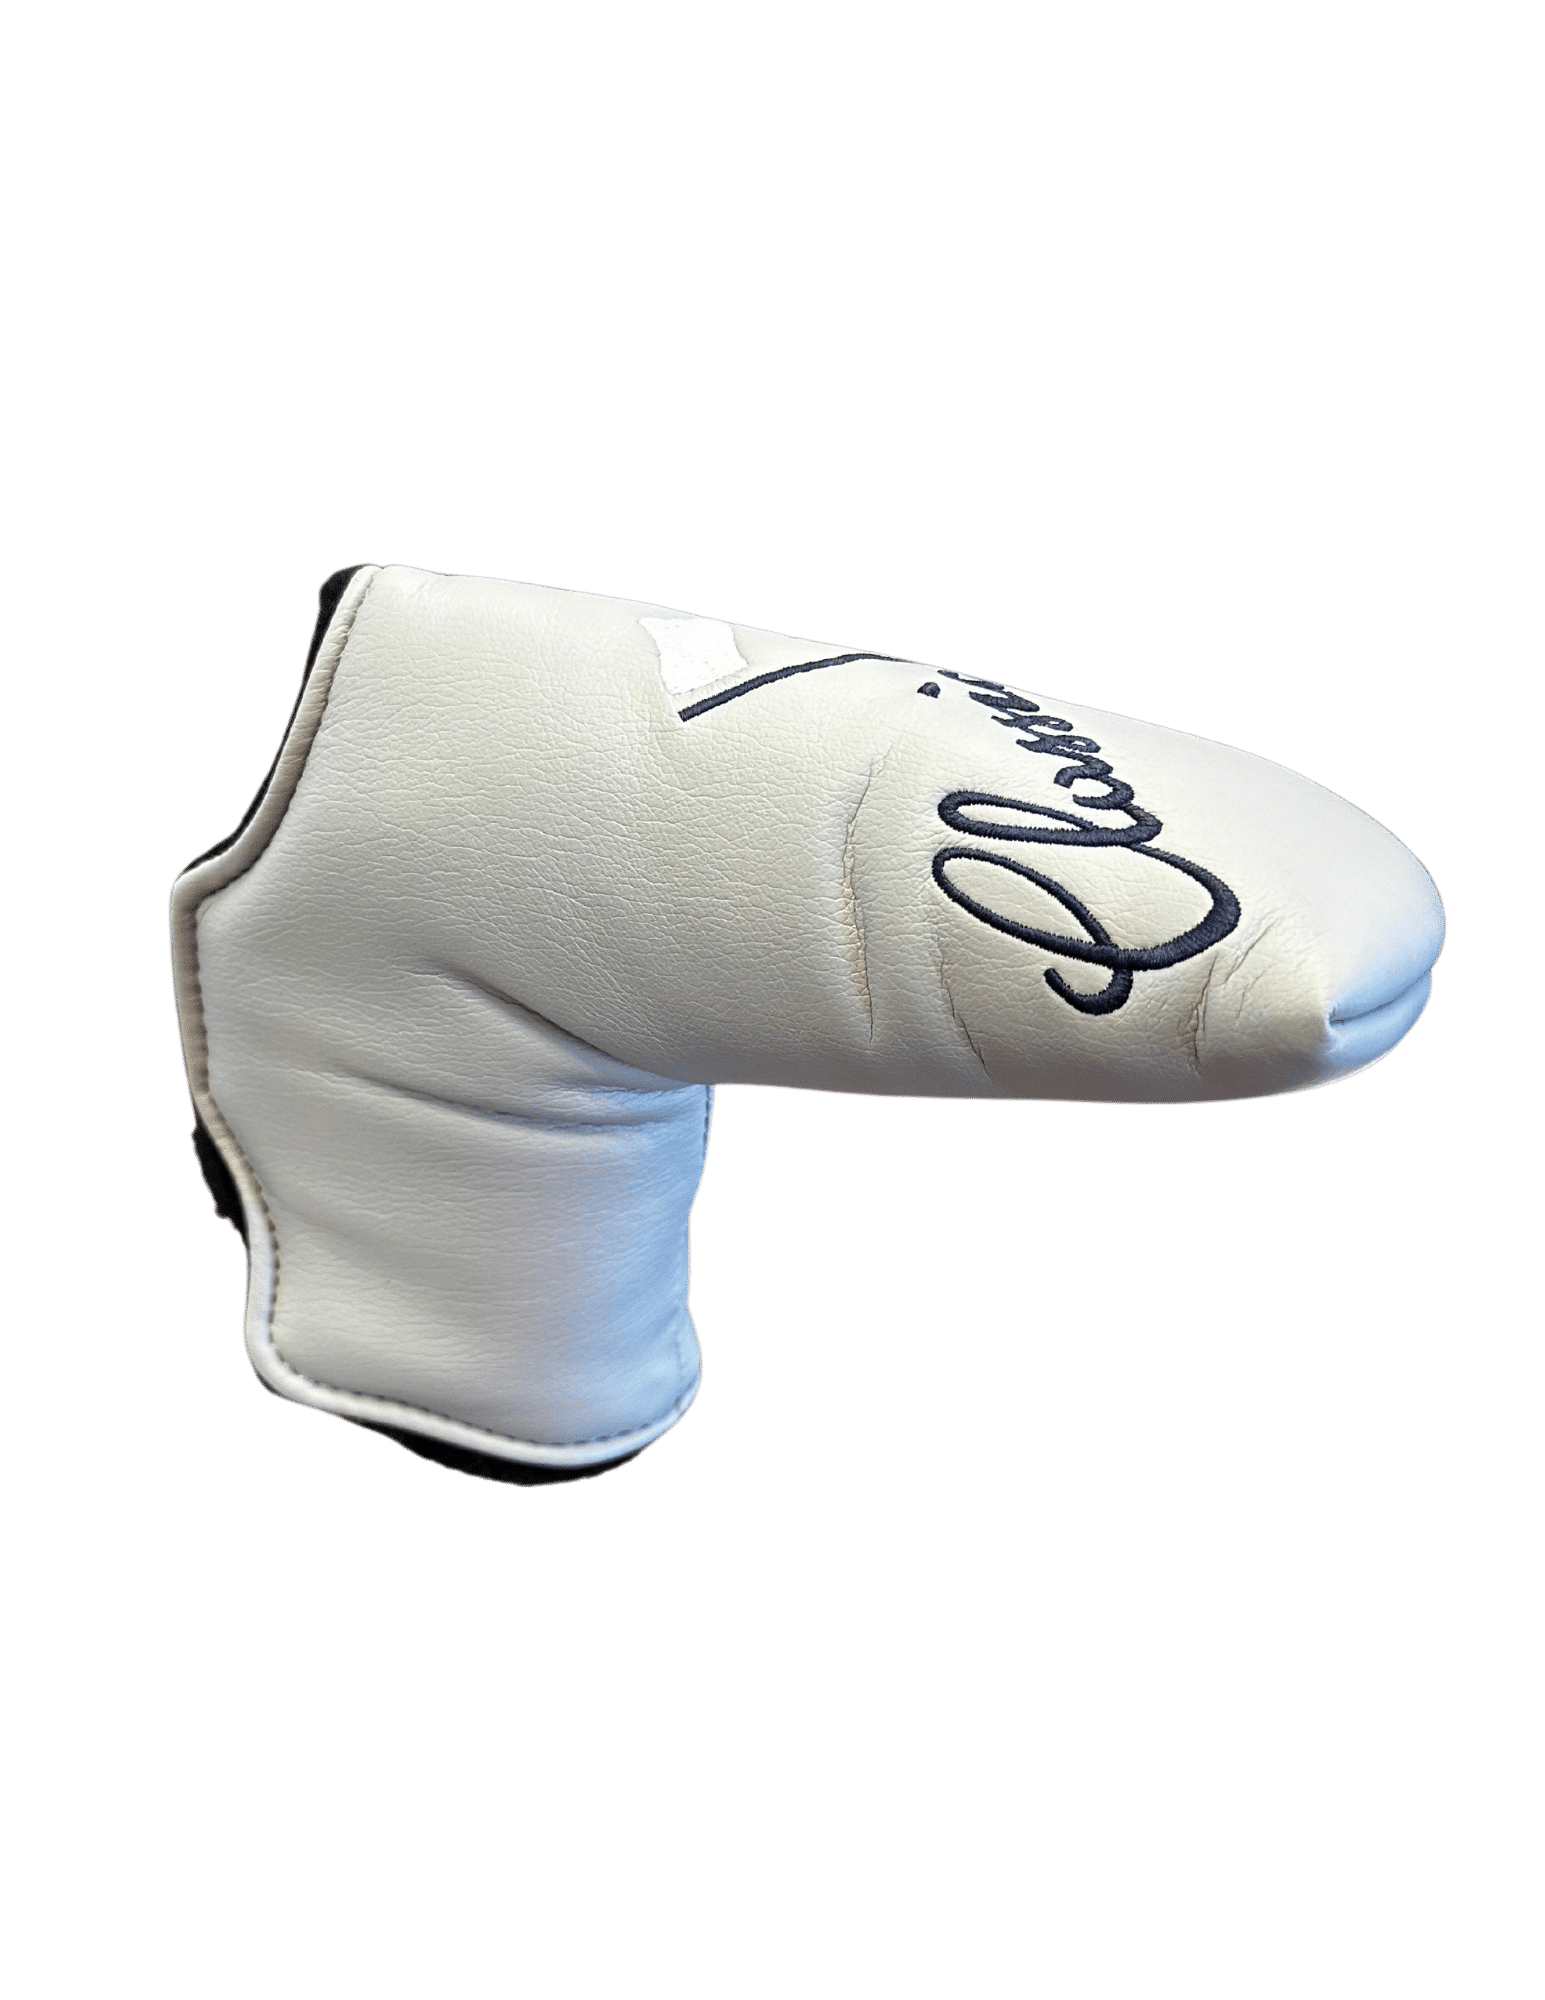 AM&E Logoed Blade Putter Cover